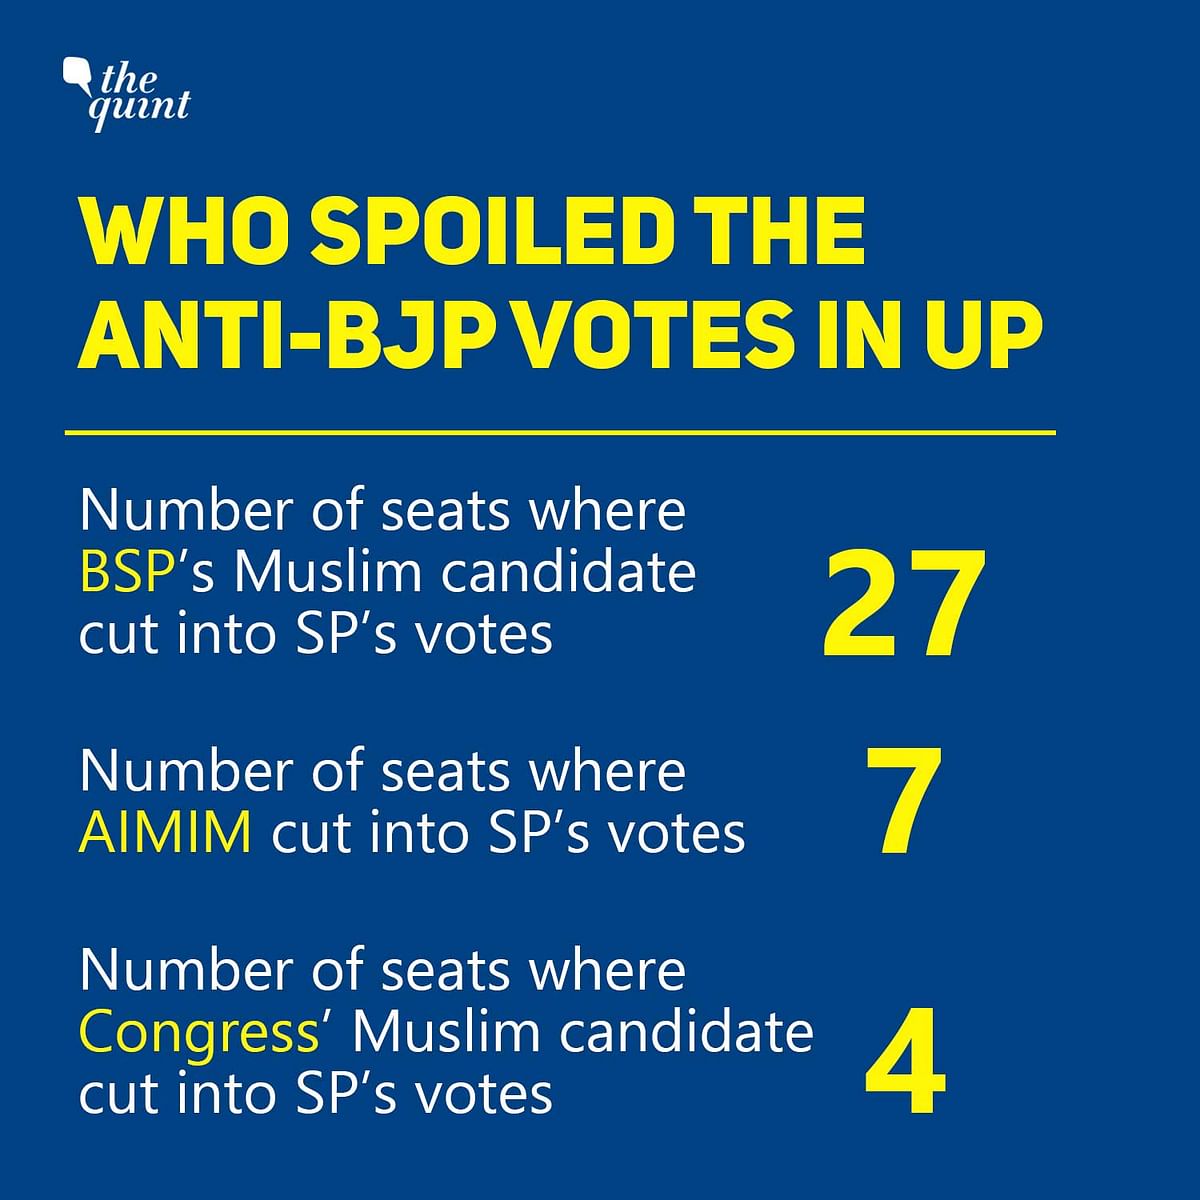 The Quint analysed all 273 seats where BJP+ won in UP, and found 38 on which BSP, AIMIM and Congress cut SP's votes.